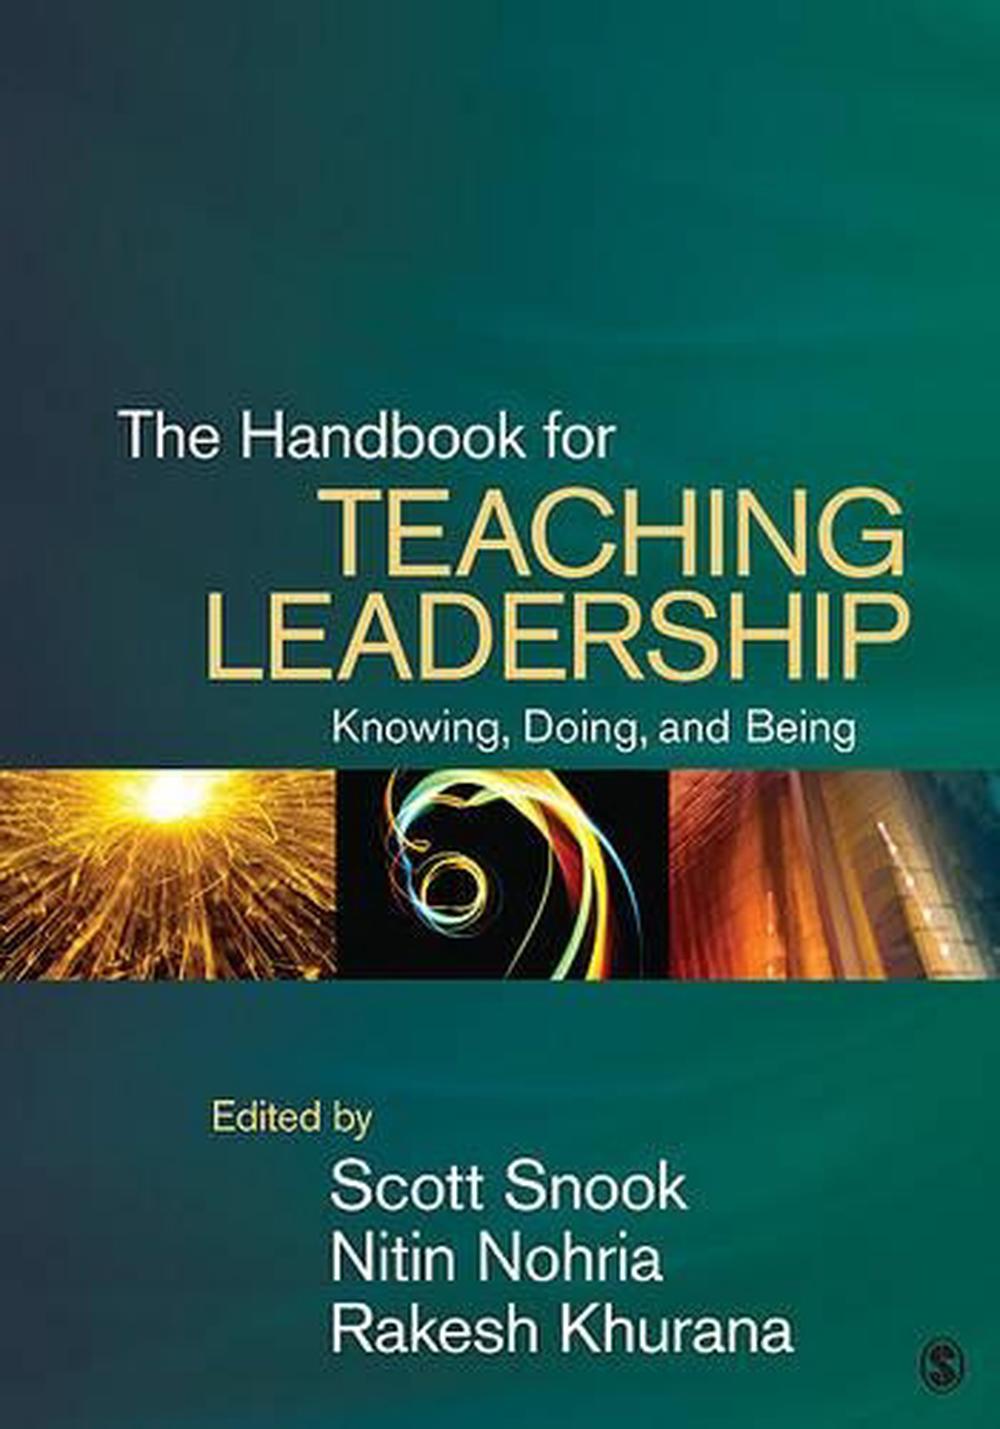 The Handbook for Teaching Leadership Knowing, Doing, and Being by